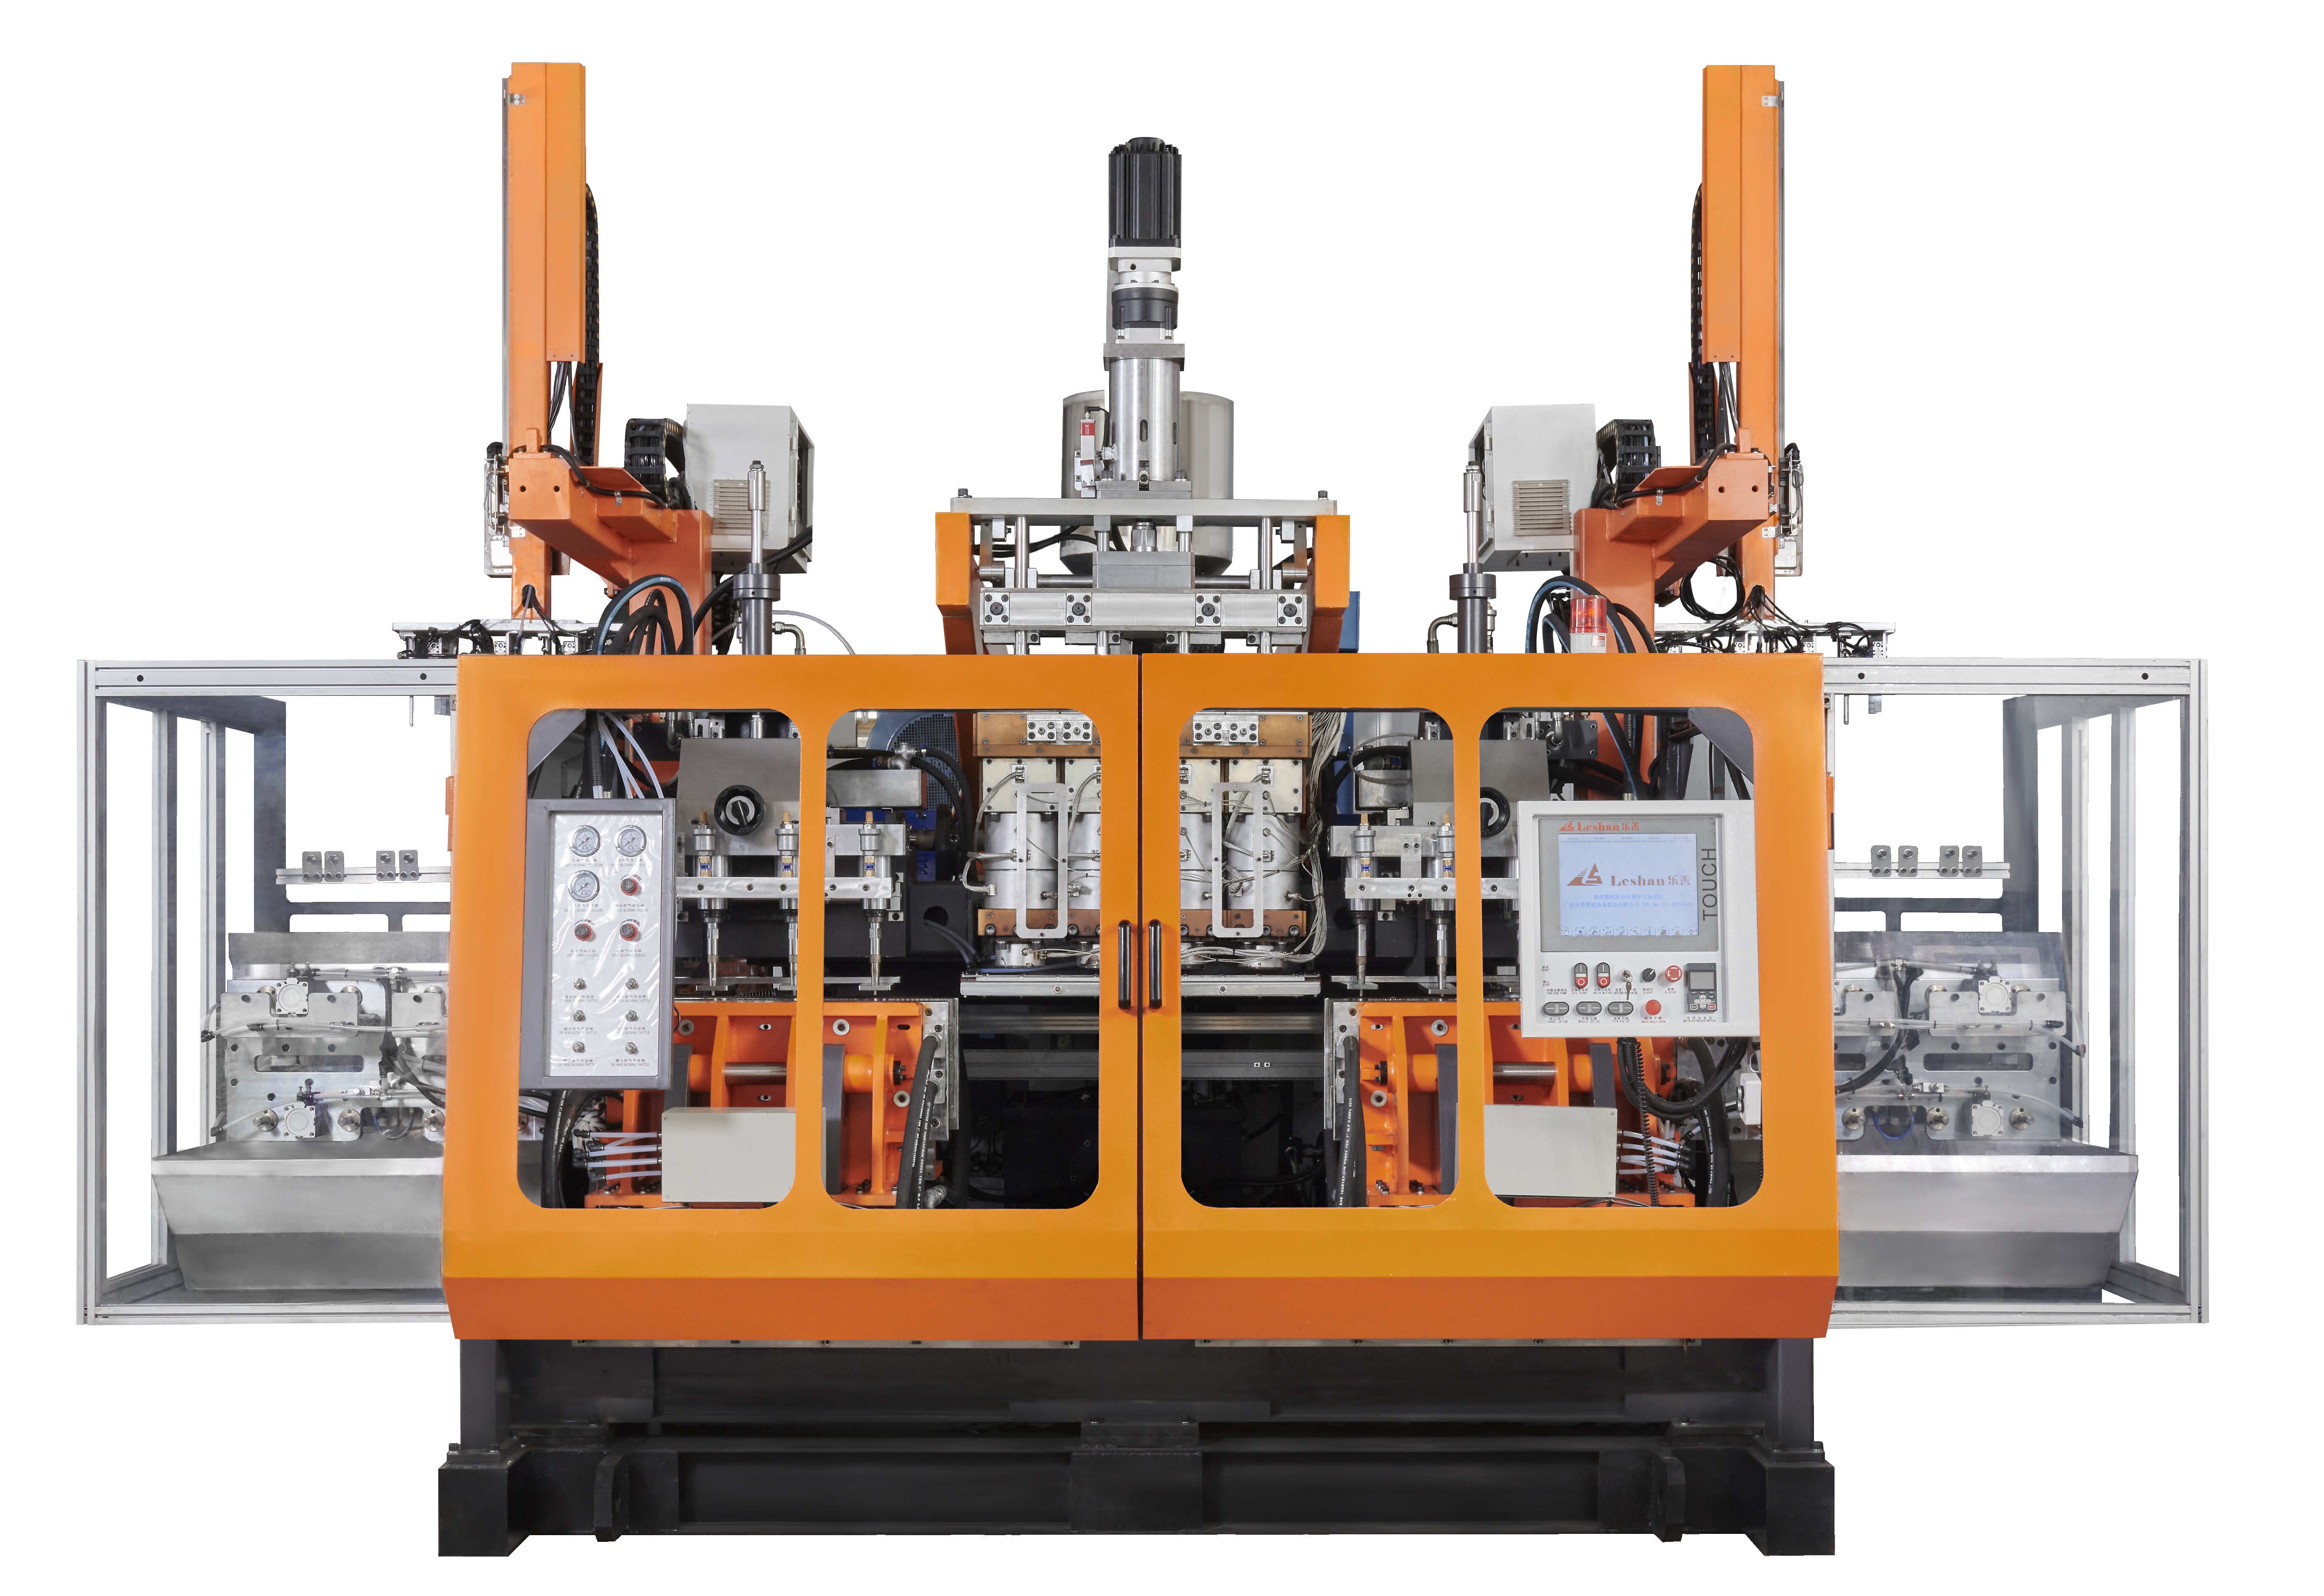 What are the safety standards for 1l blow molding machine?